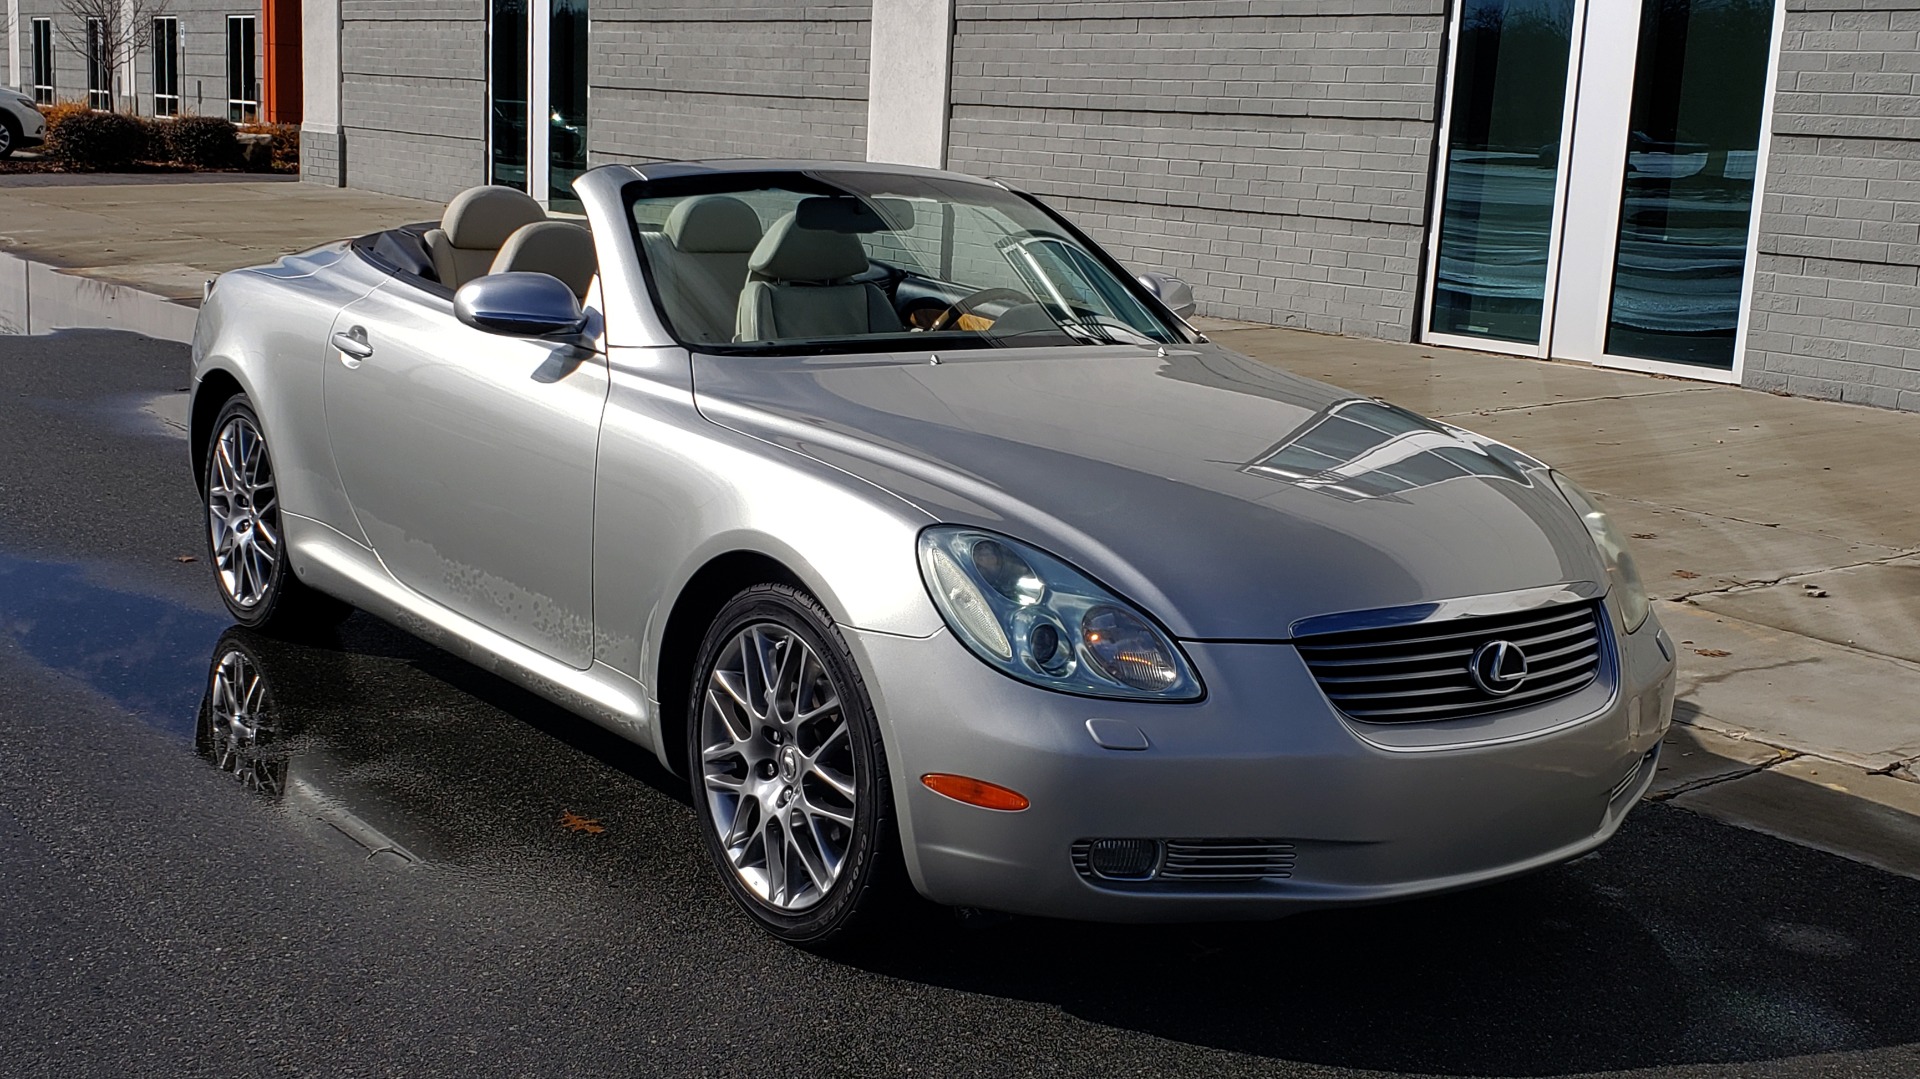 Used 2004 Lexus SC 430 CONVERTIBLE / 4.3L V8 / 5-SPD AUTO / MARK LEVINSON / 18IN WHEELS for sale Sold at Formula Imports in Charlotte NC 28227 18